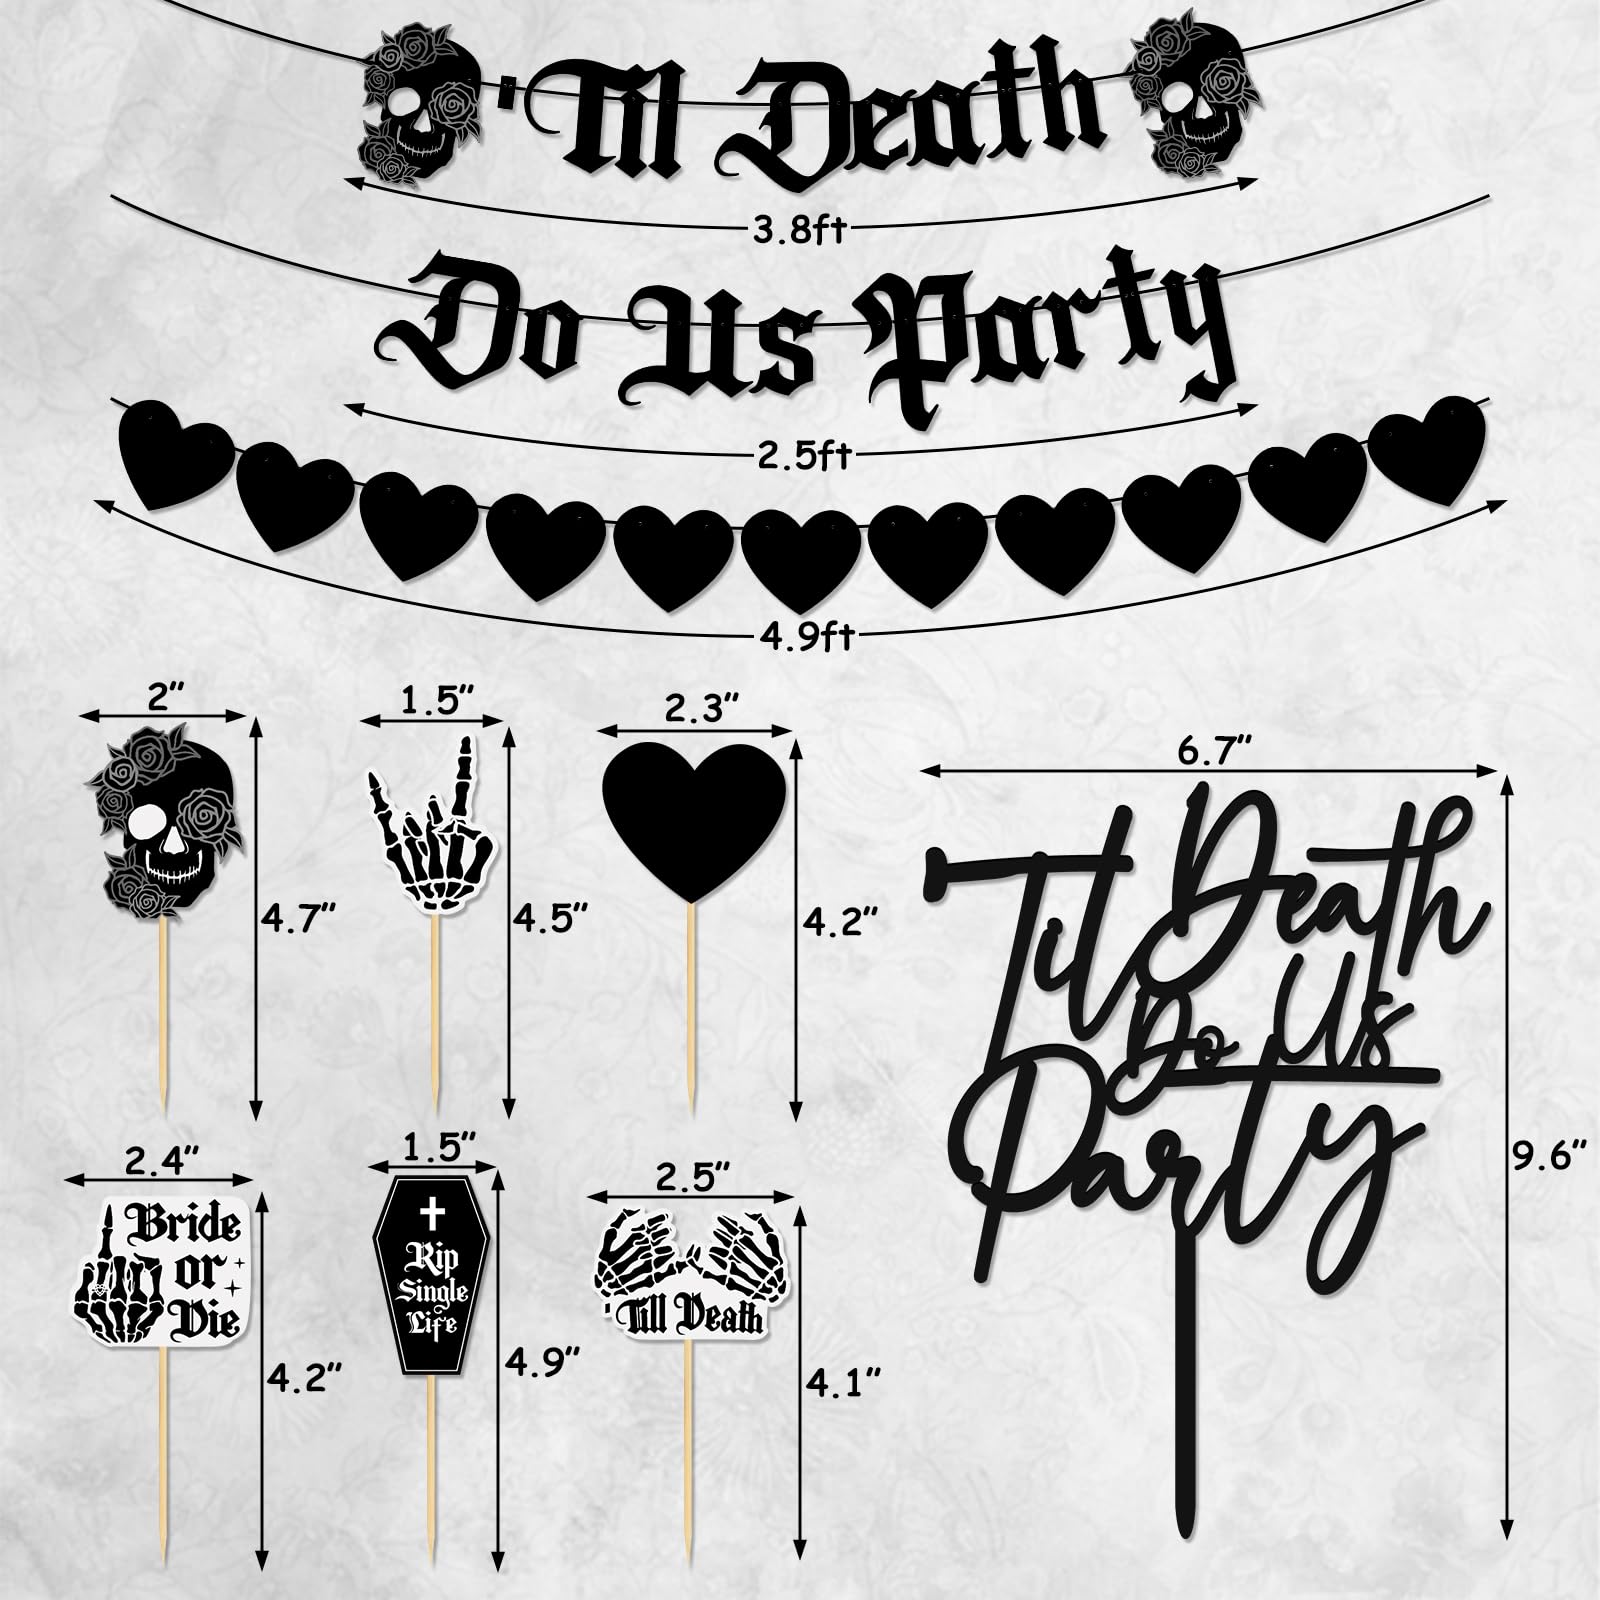 Kitticcino Til Death Do Us Party Party Decorations Gothic Party Banner Acrylic Cake Topper Black White Balloons Black Heart Garland for Bride or Die Bachelorette Halloween Wedding Supplies